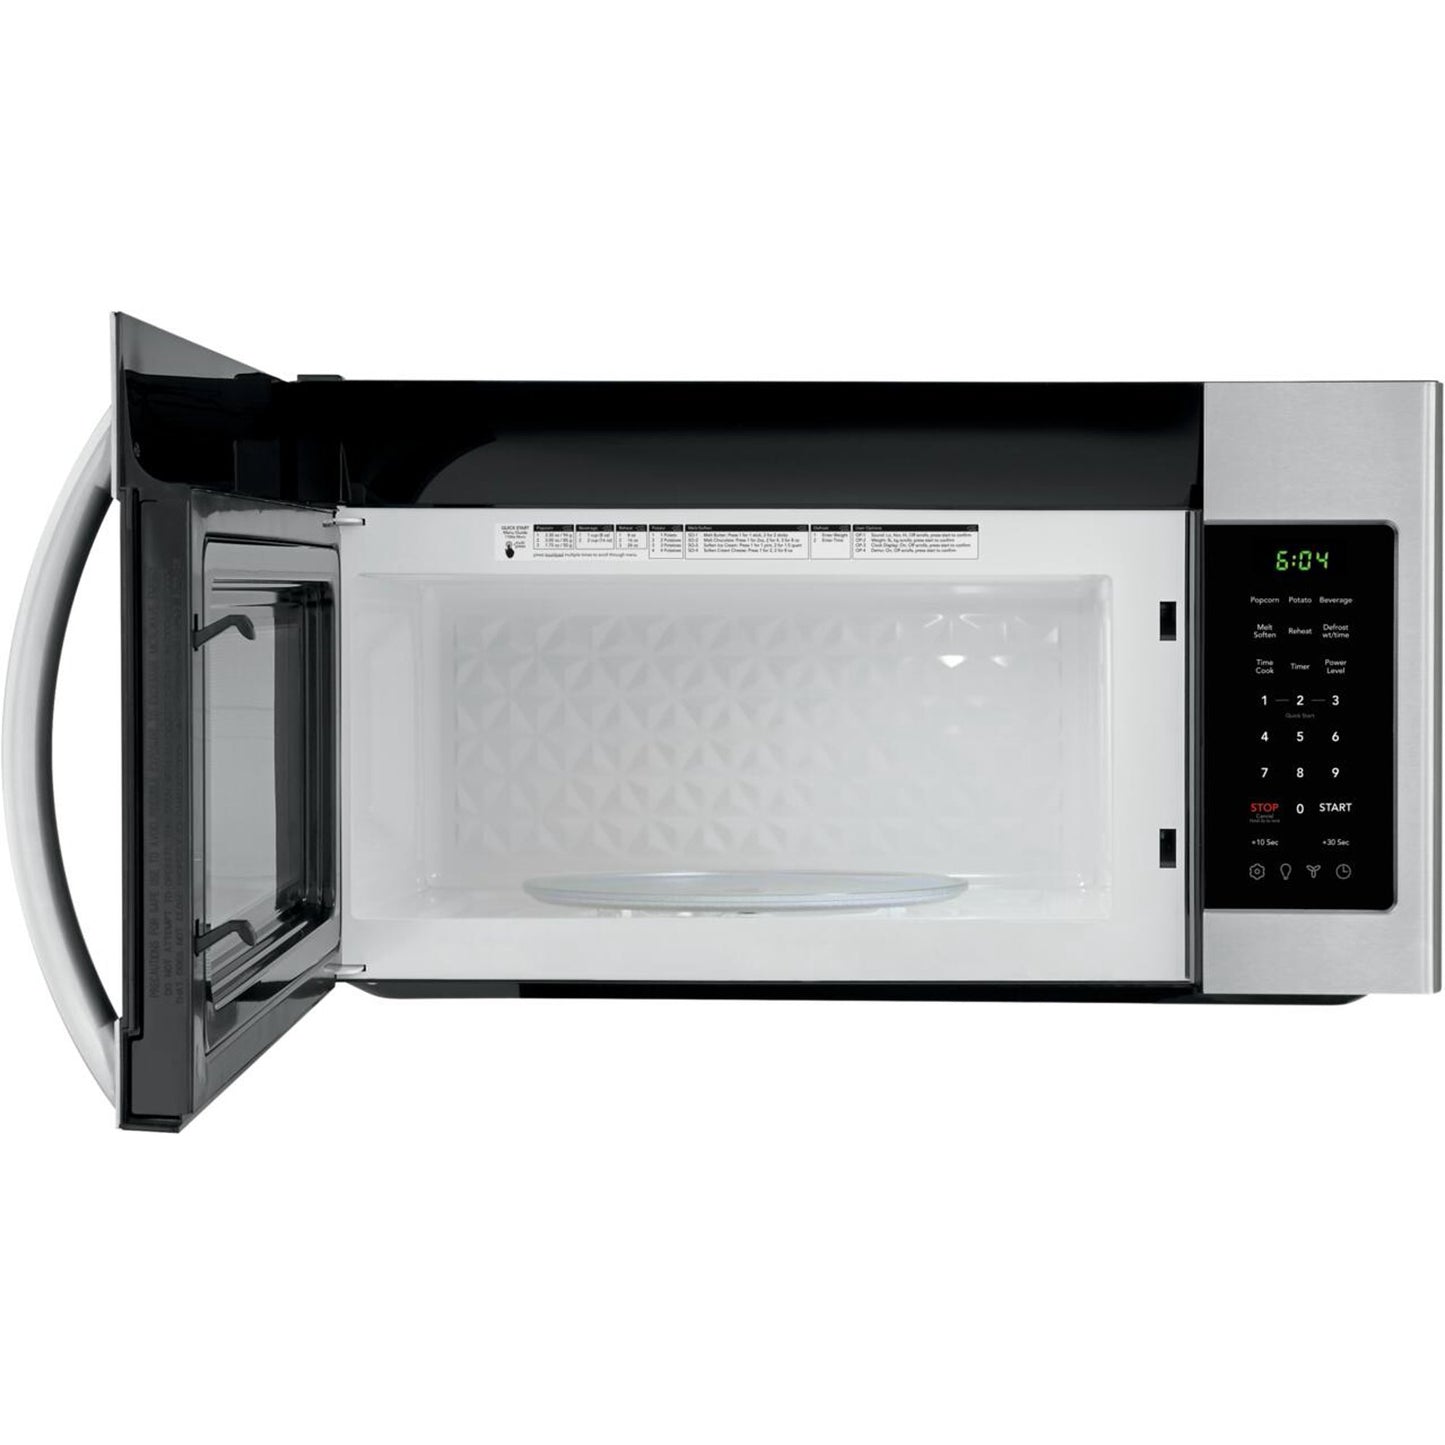 30 Inch Over the Range Microwave Oven with 1.8 cu. ft. - Frigidaire - FFMV1846VS